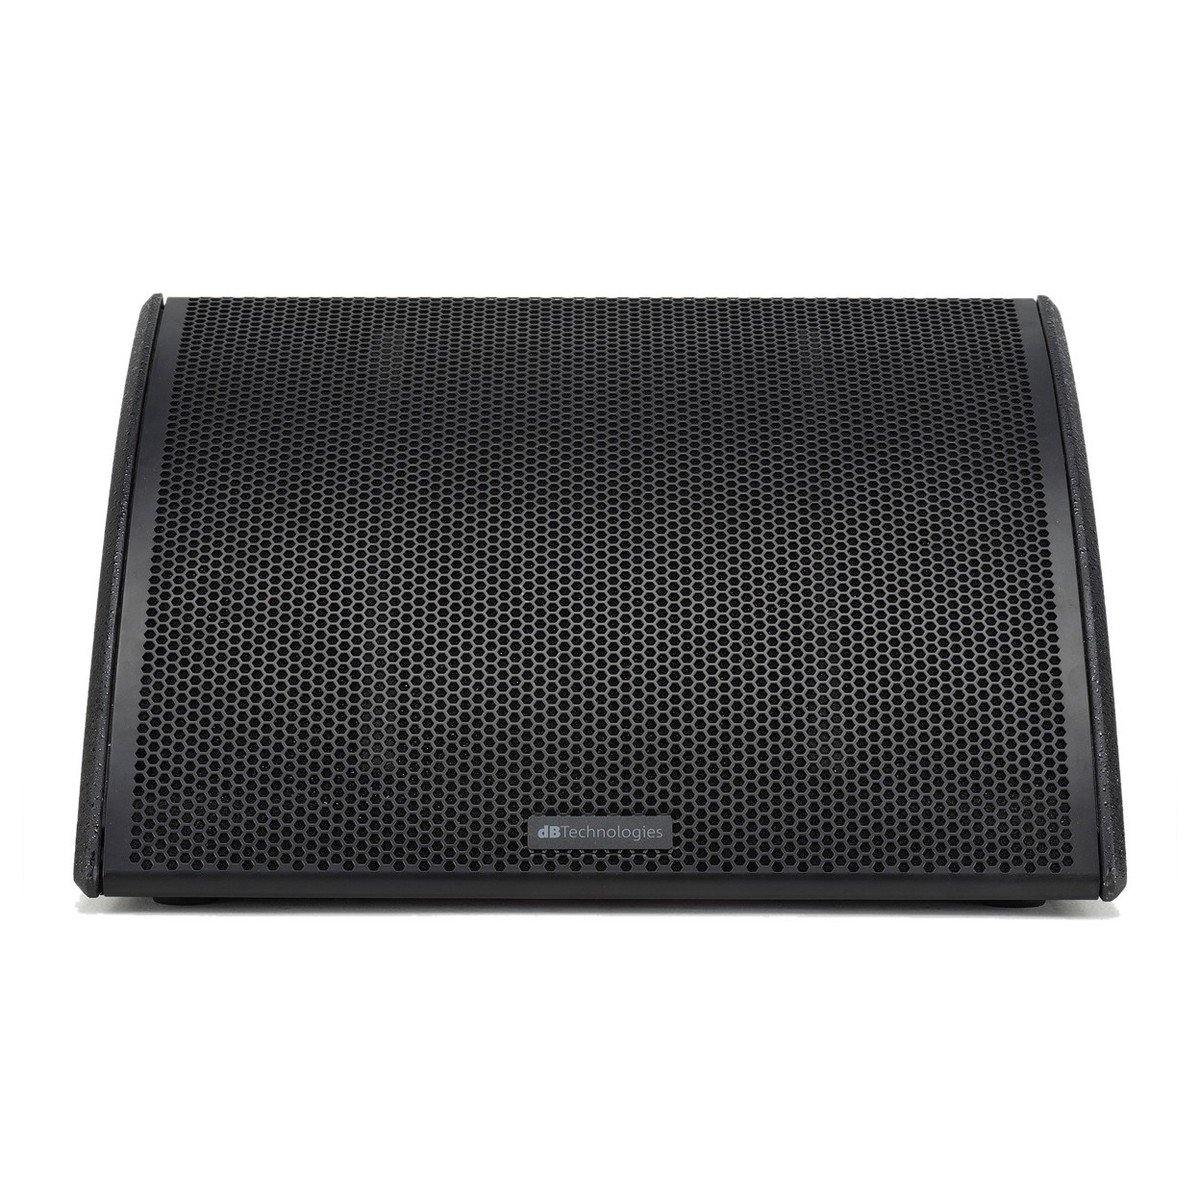 dB Technologies FMX15 15'' Active Floor Monitor - DY Pro Audio